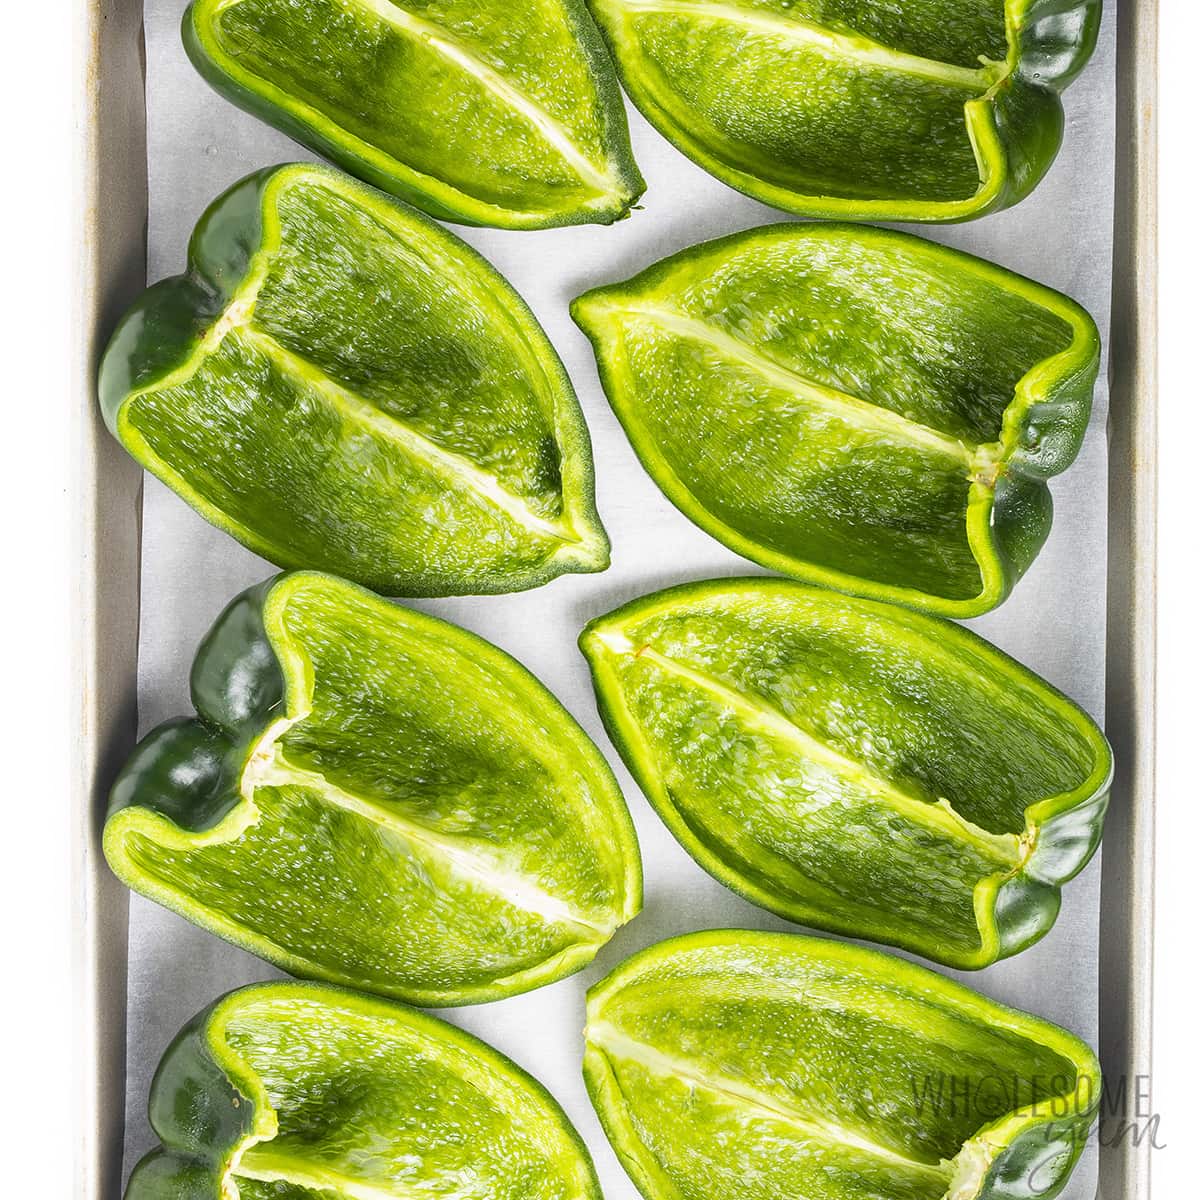 Halved poblano peppers on a baking sheet.